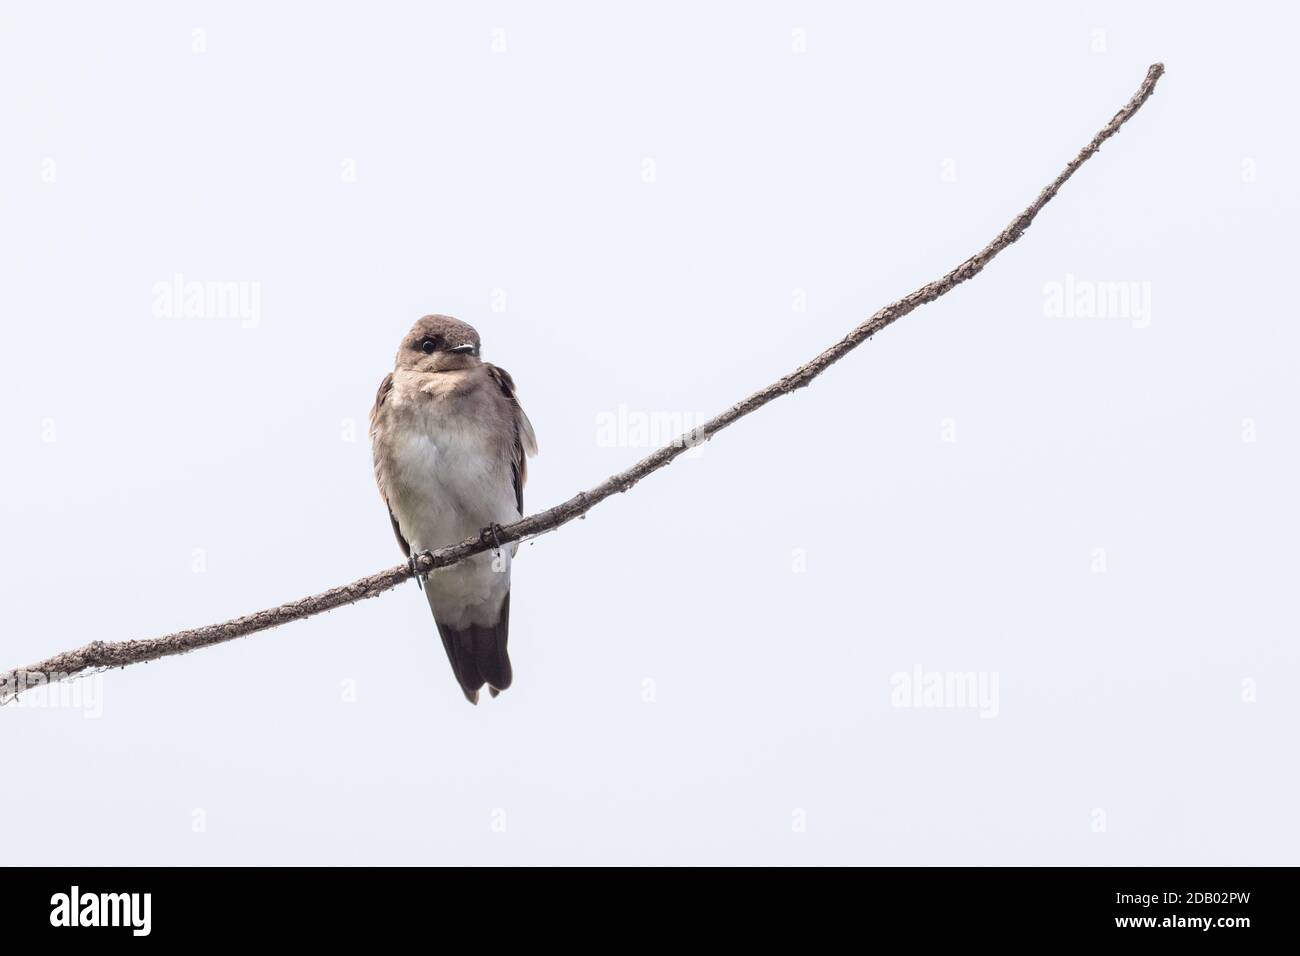 Northern rough-winged swallow (Stelgidopteryx serripennis) perched on a branch Stock Photo